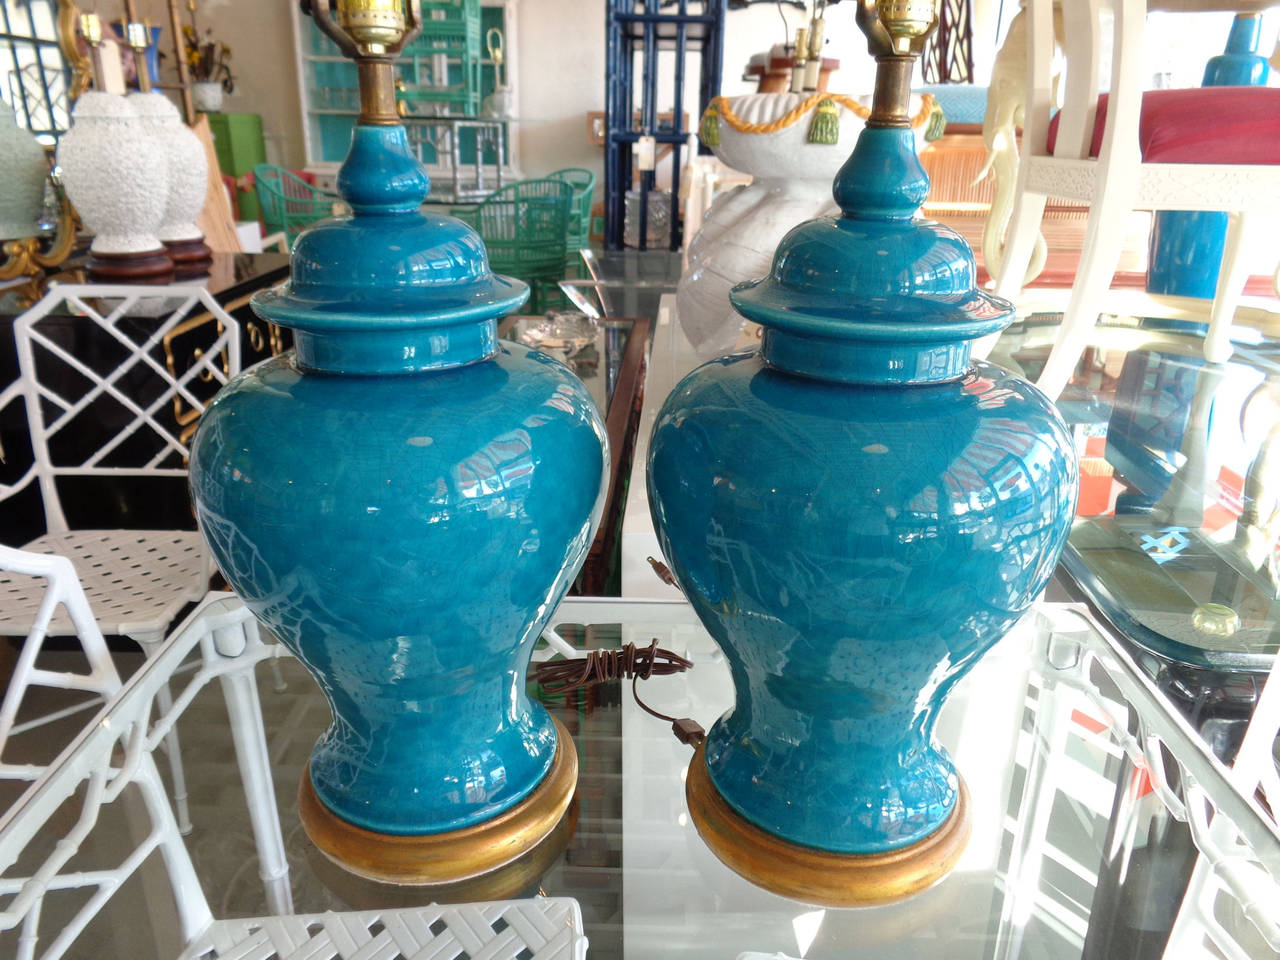 Pair of Turquoise Crackle Glaze GINGER JAR Lamps in nice as found VINTAGE condition. There are minor imperfections to the finish from age. The lamps have the original wiring and no shades.